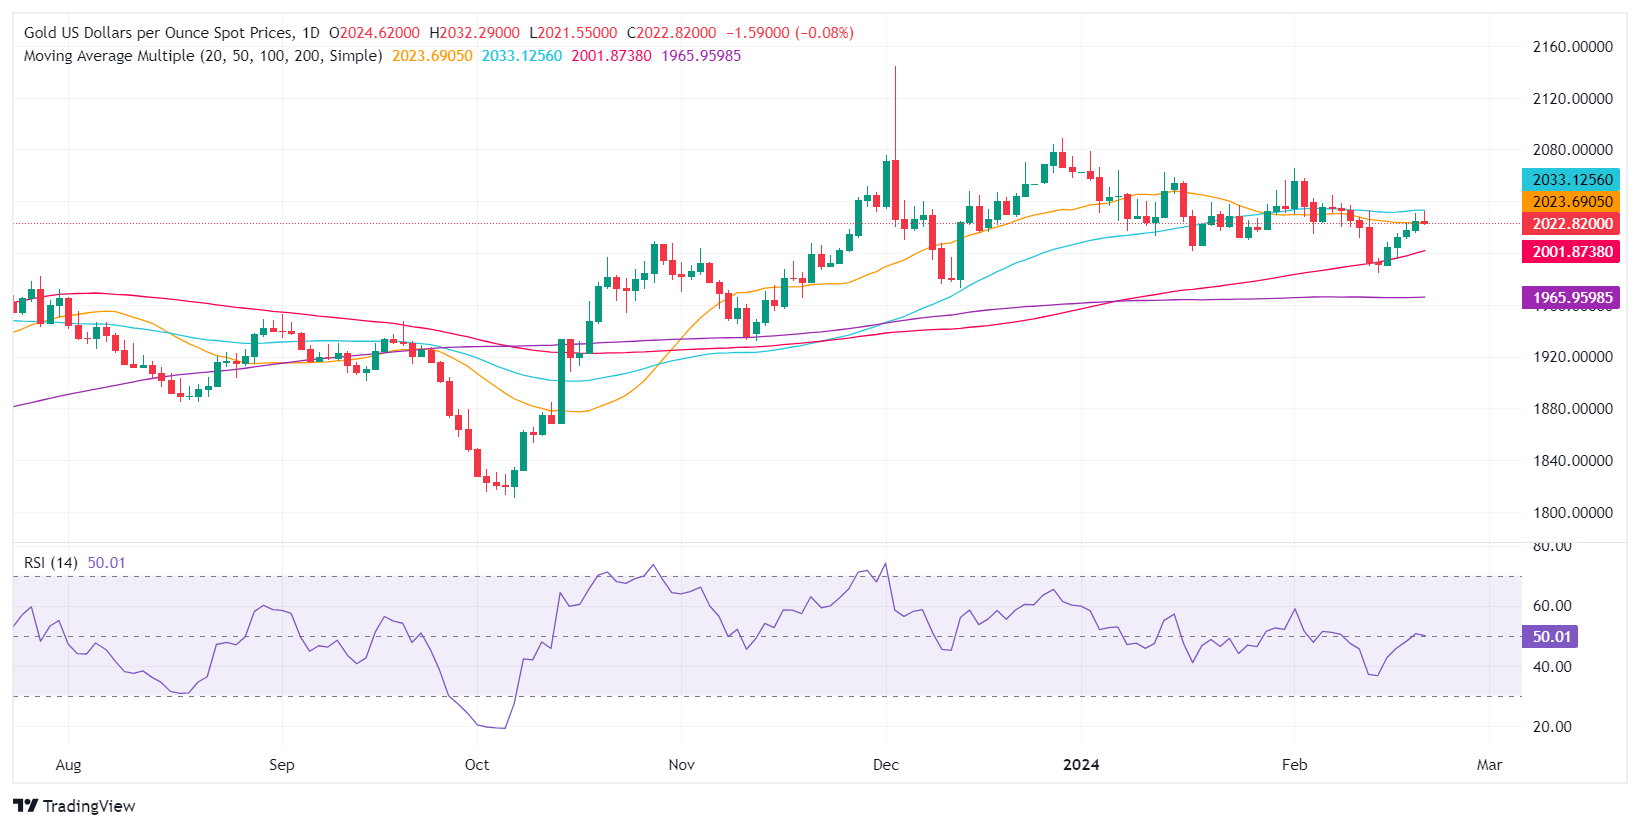 Technical analysis: Gold stays above 100-day SMA, eyes key resistance near 50-day SMA